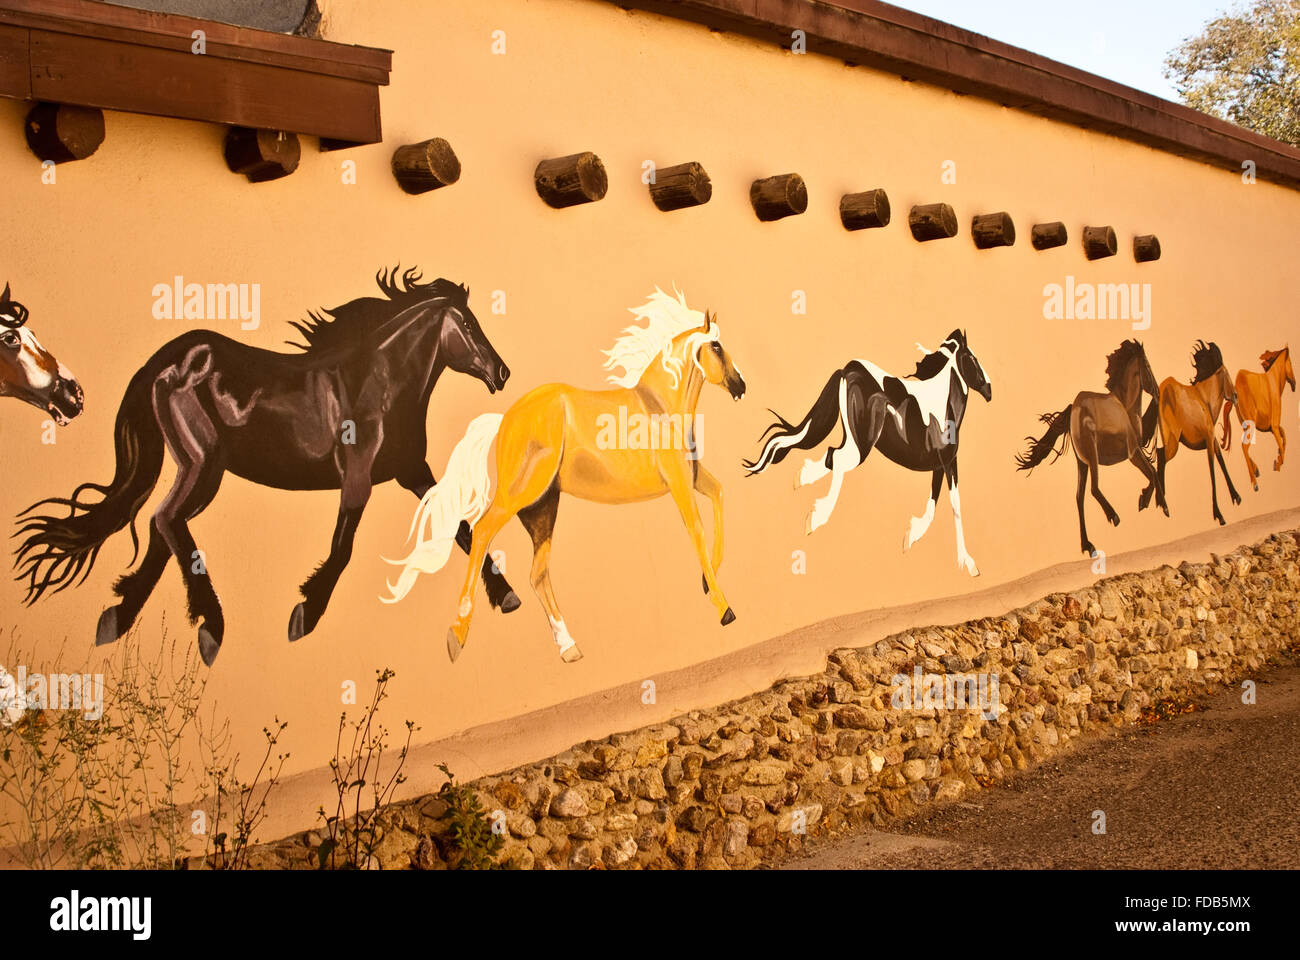 Mural depicting wild painted horses on walls of old town Taos, New Mexico USA Stock Photo